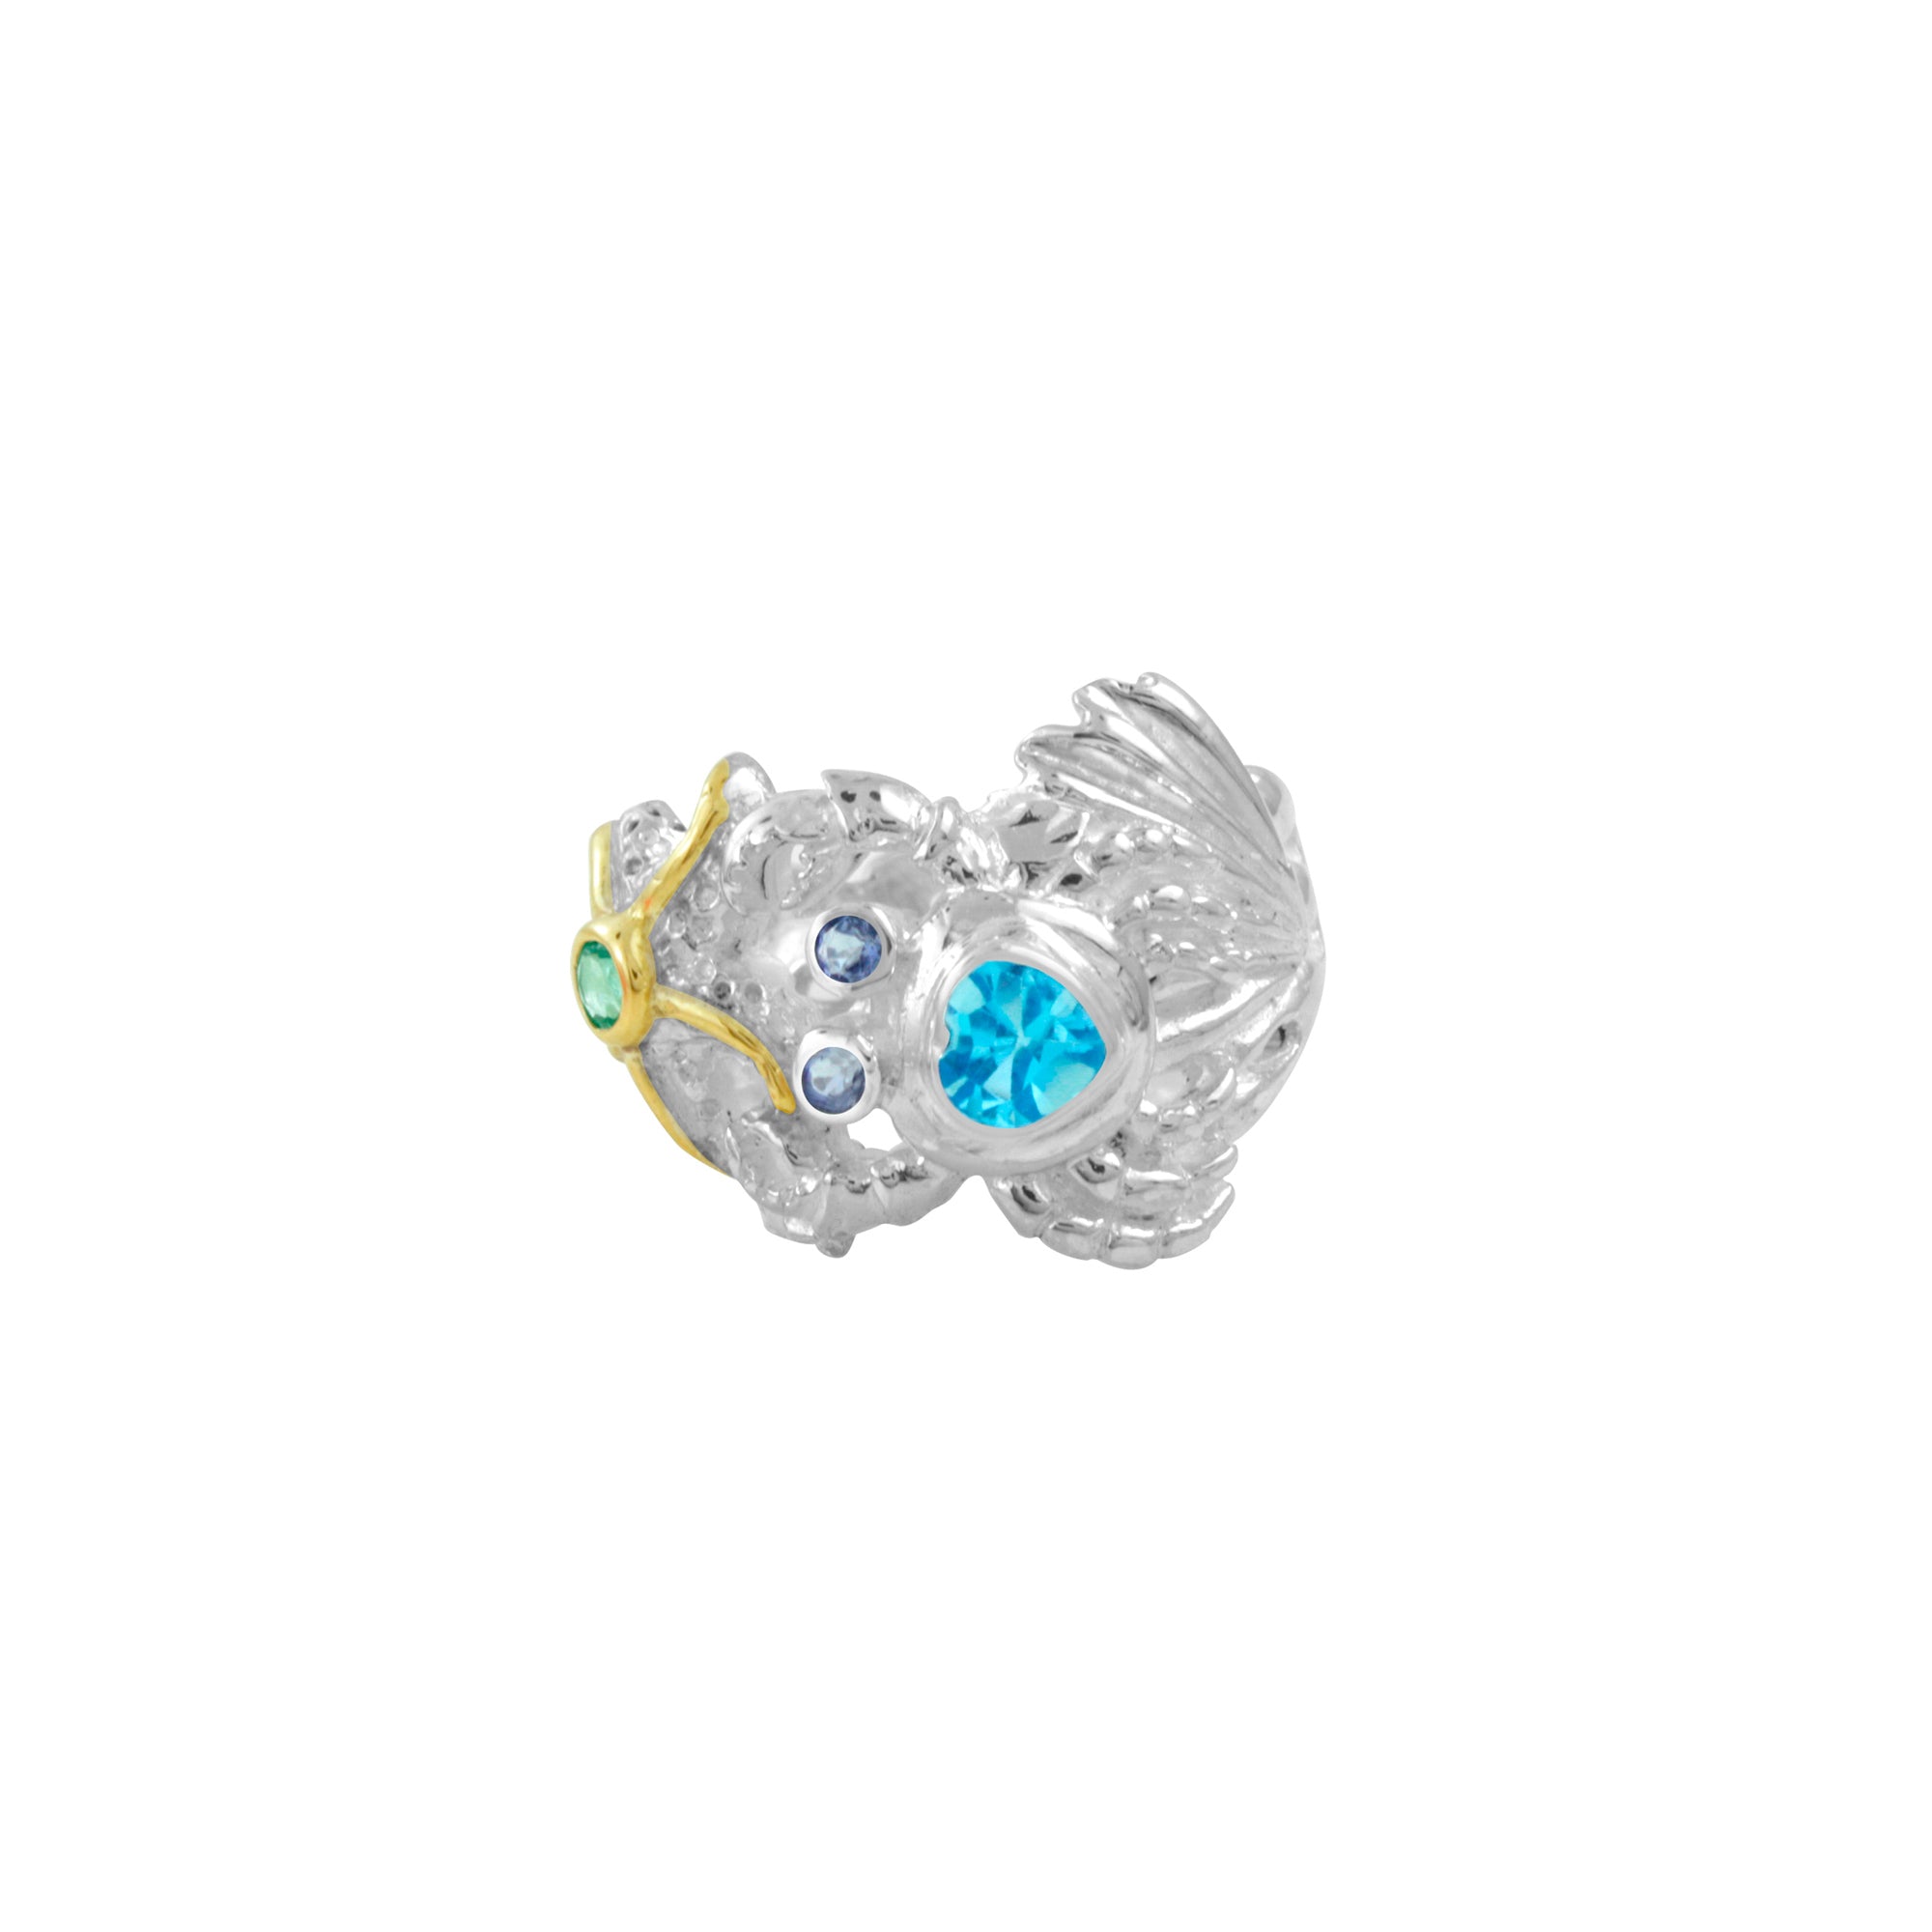 Adorable Silver Crab Ring with Blue Heart!